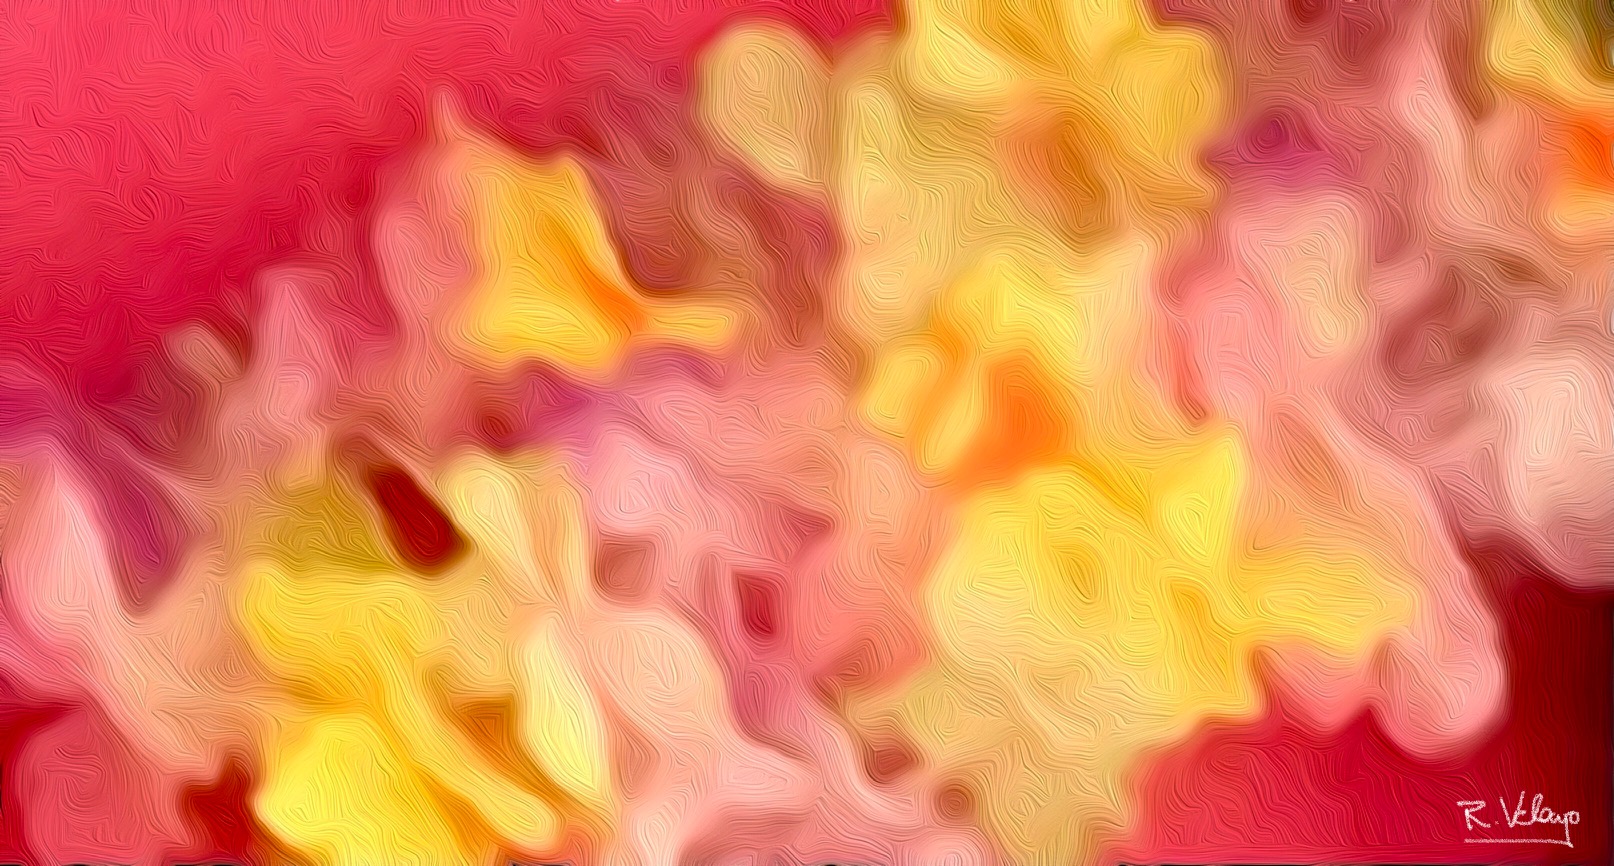 "A BLUR OF PINK AND YELLOW TROPICAL FLOWERS" [Created: 4/20/2021]